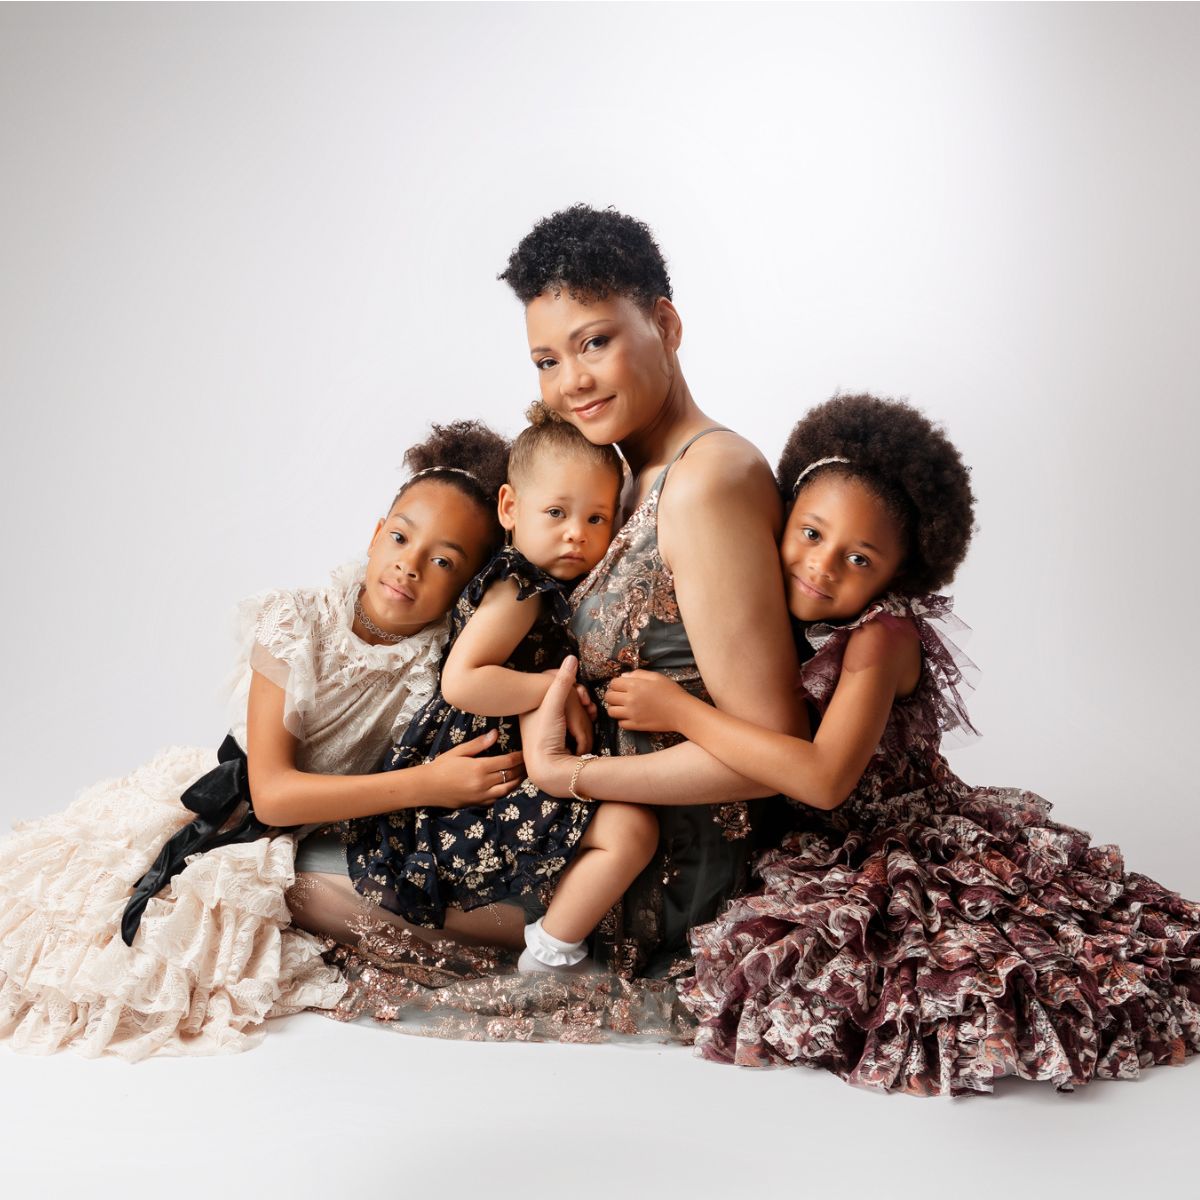 Stunning motherhood image of a mom surrounded by her three girls celebrating black mothers in a fine art studio portrait image